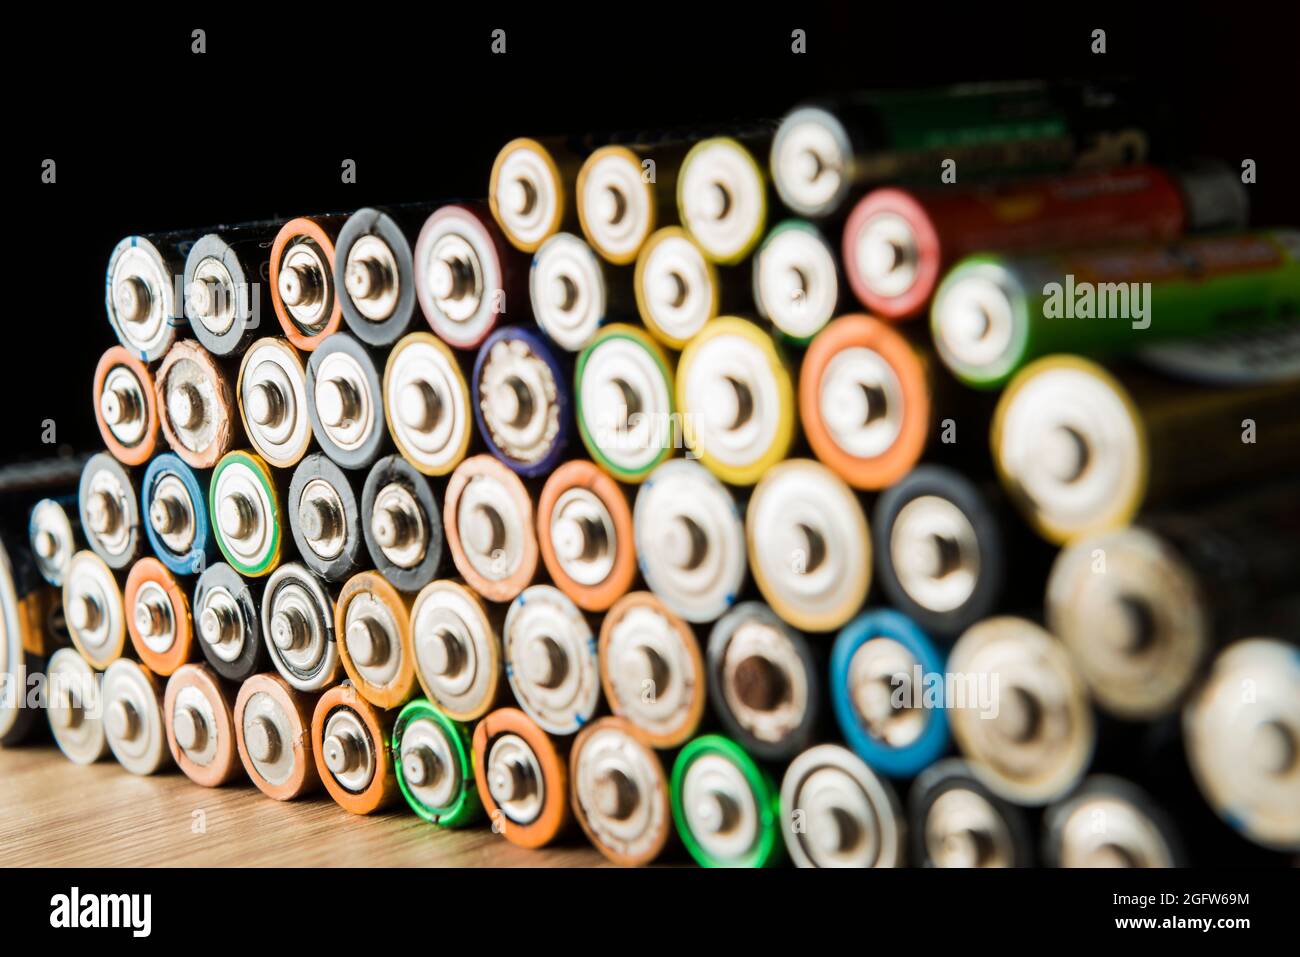 Flat batteries placed neatly on a wooden table. Concept of recycling and care for the environment. Stock Photo